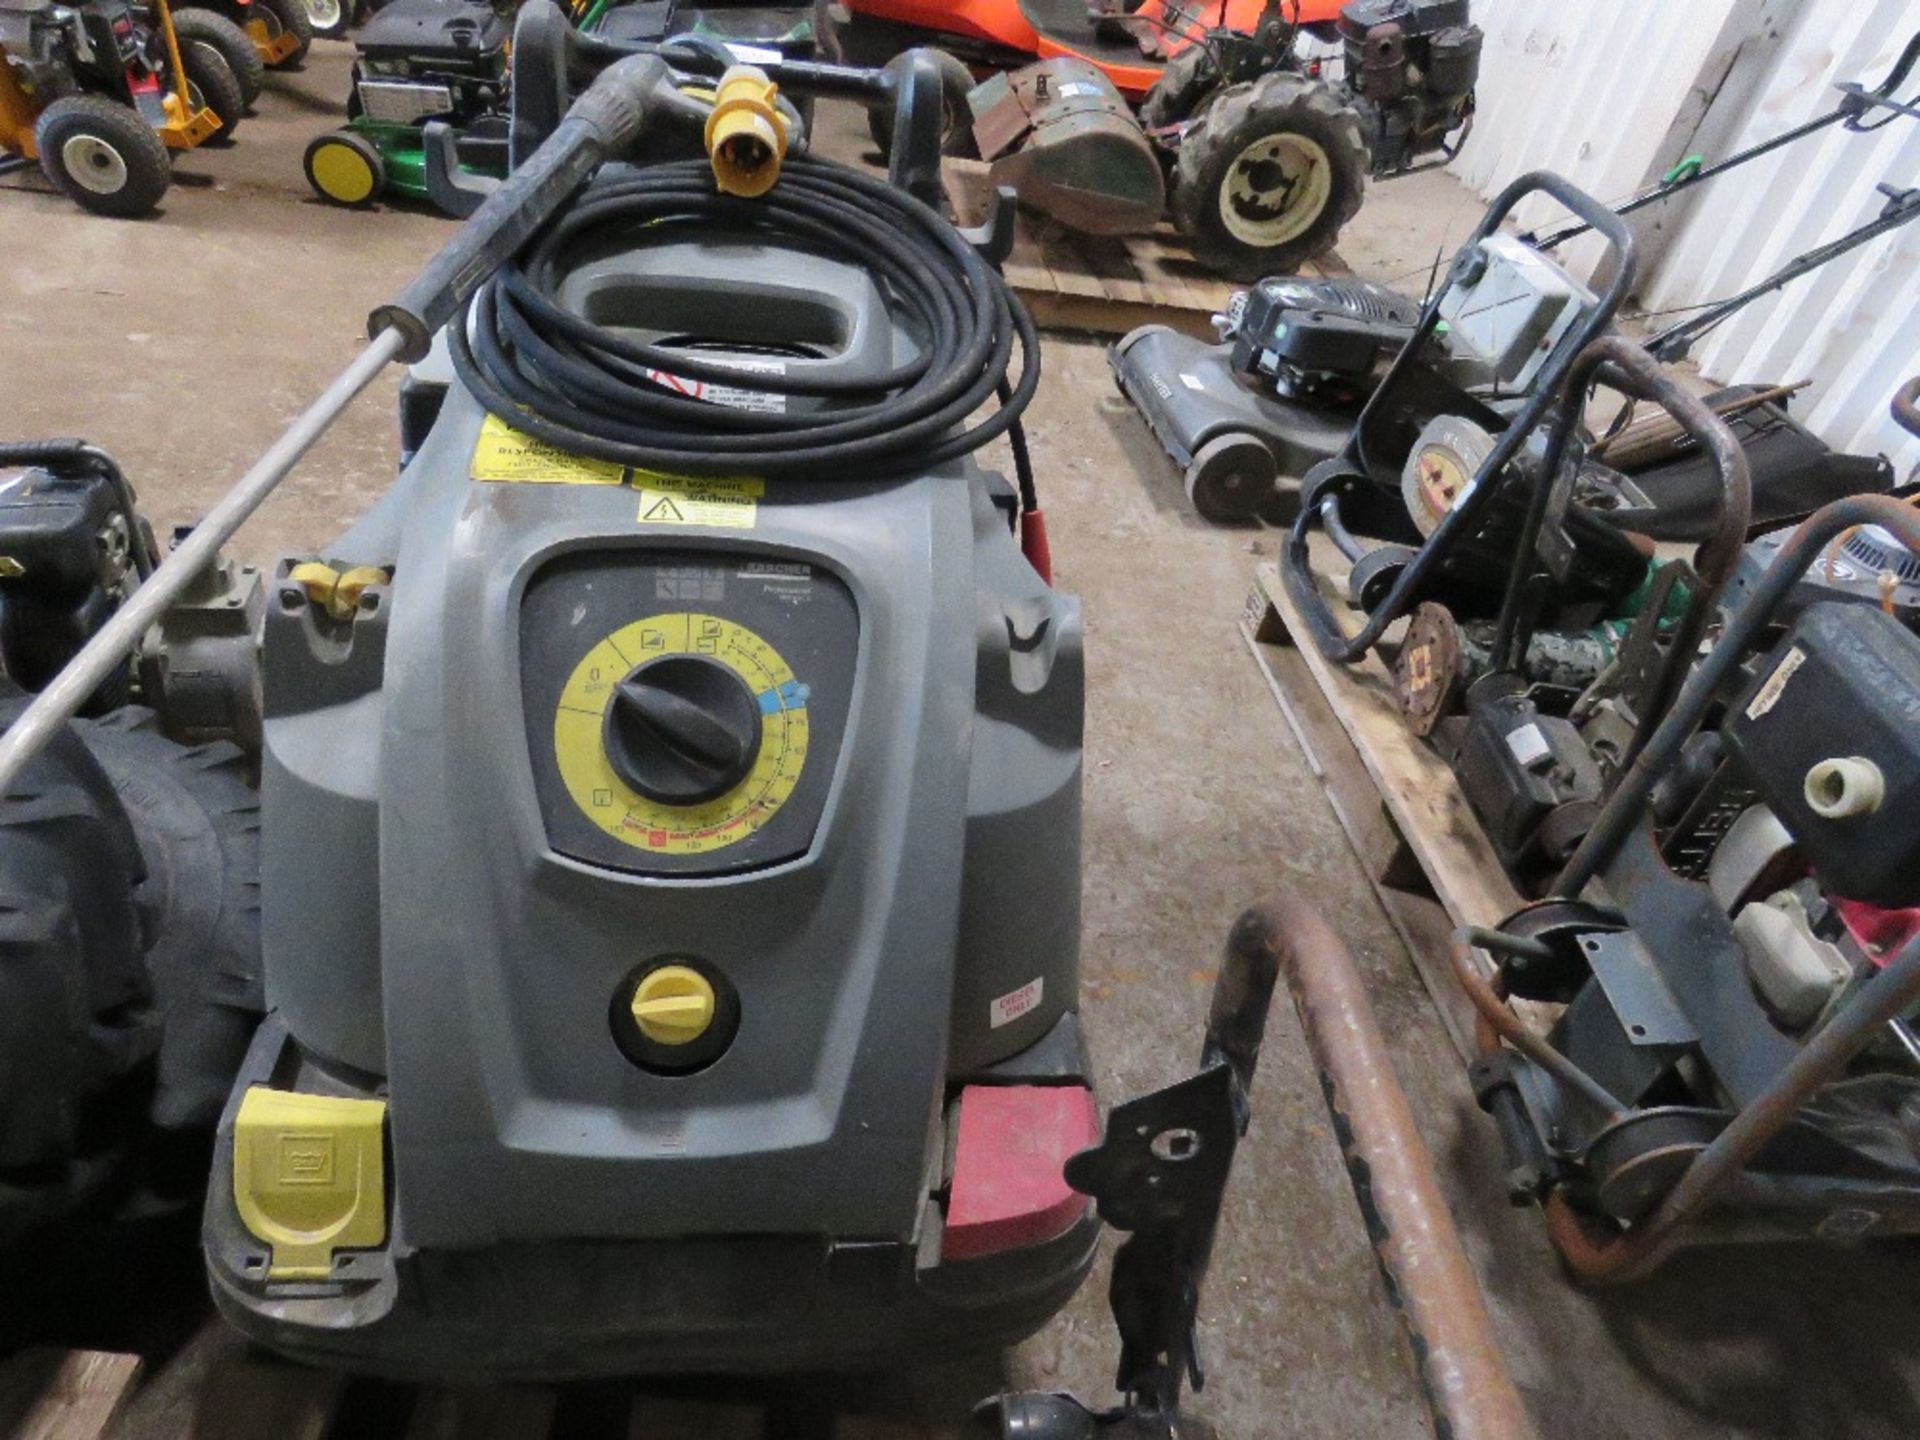 KARCHER HDS 6110C 110VOLT STEAM CLEANER. YEAR 2014, UNTESTED, CONDITION UNKNOWN All items "sold as - Image 3 of 3